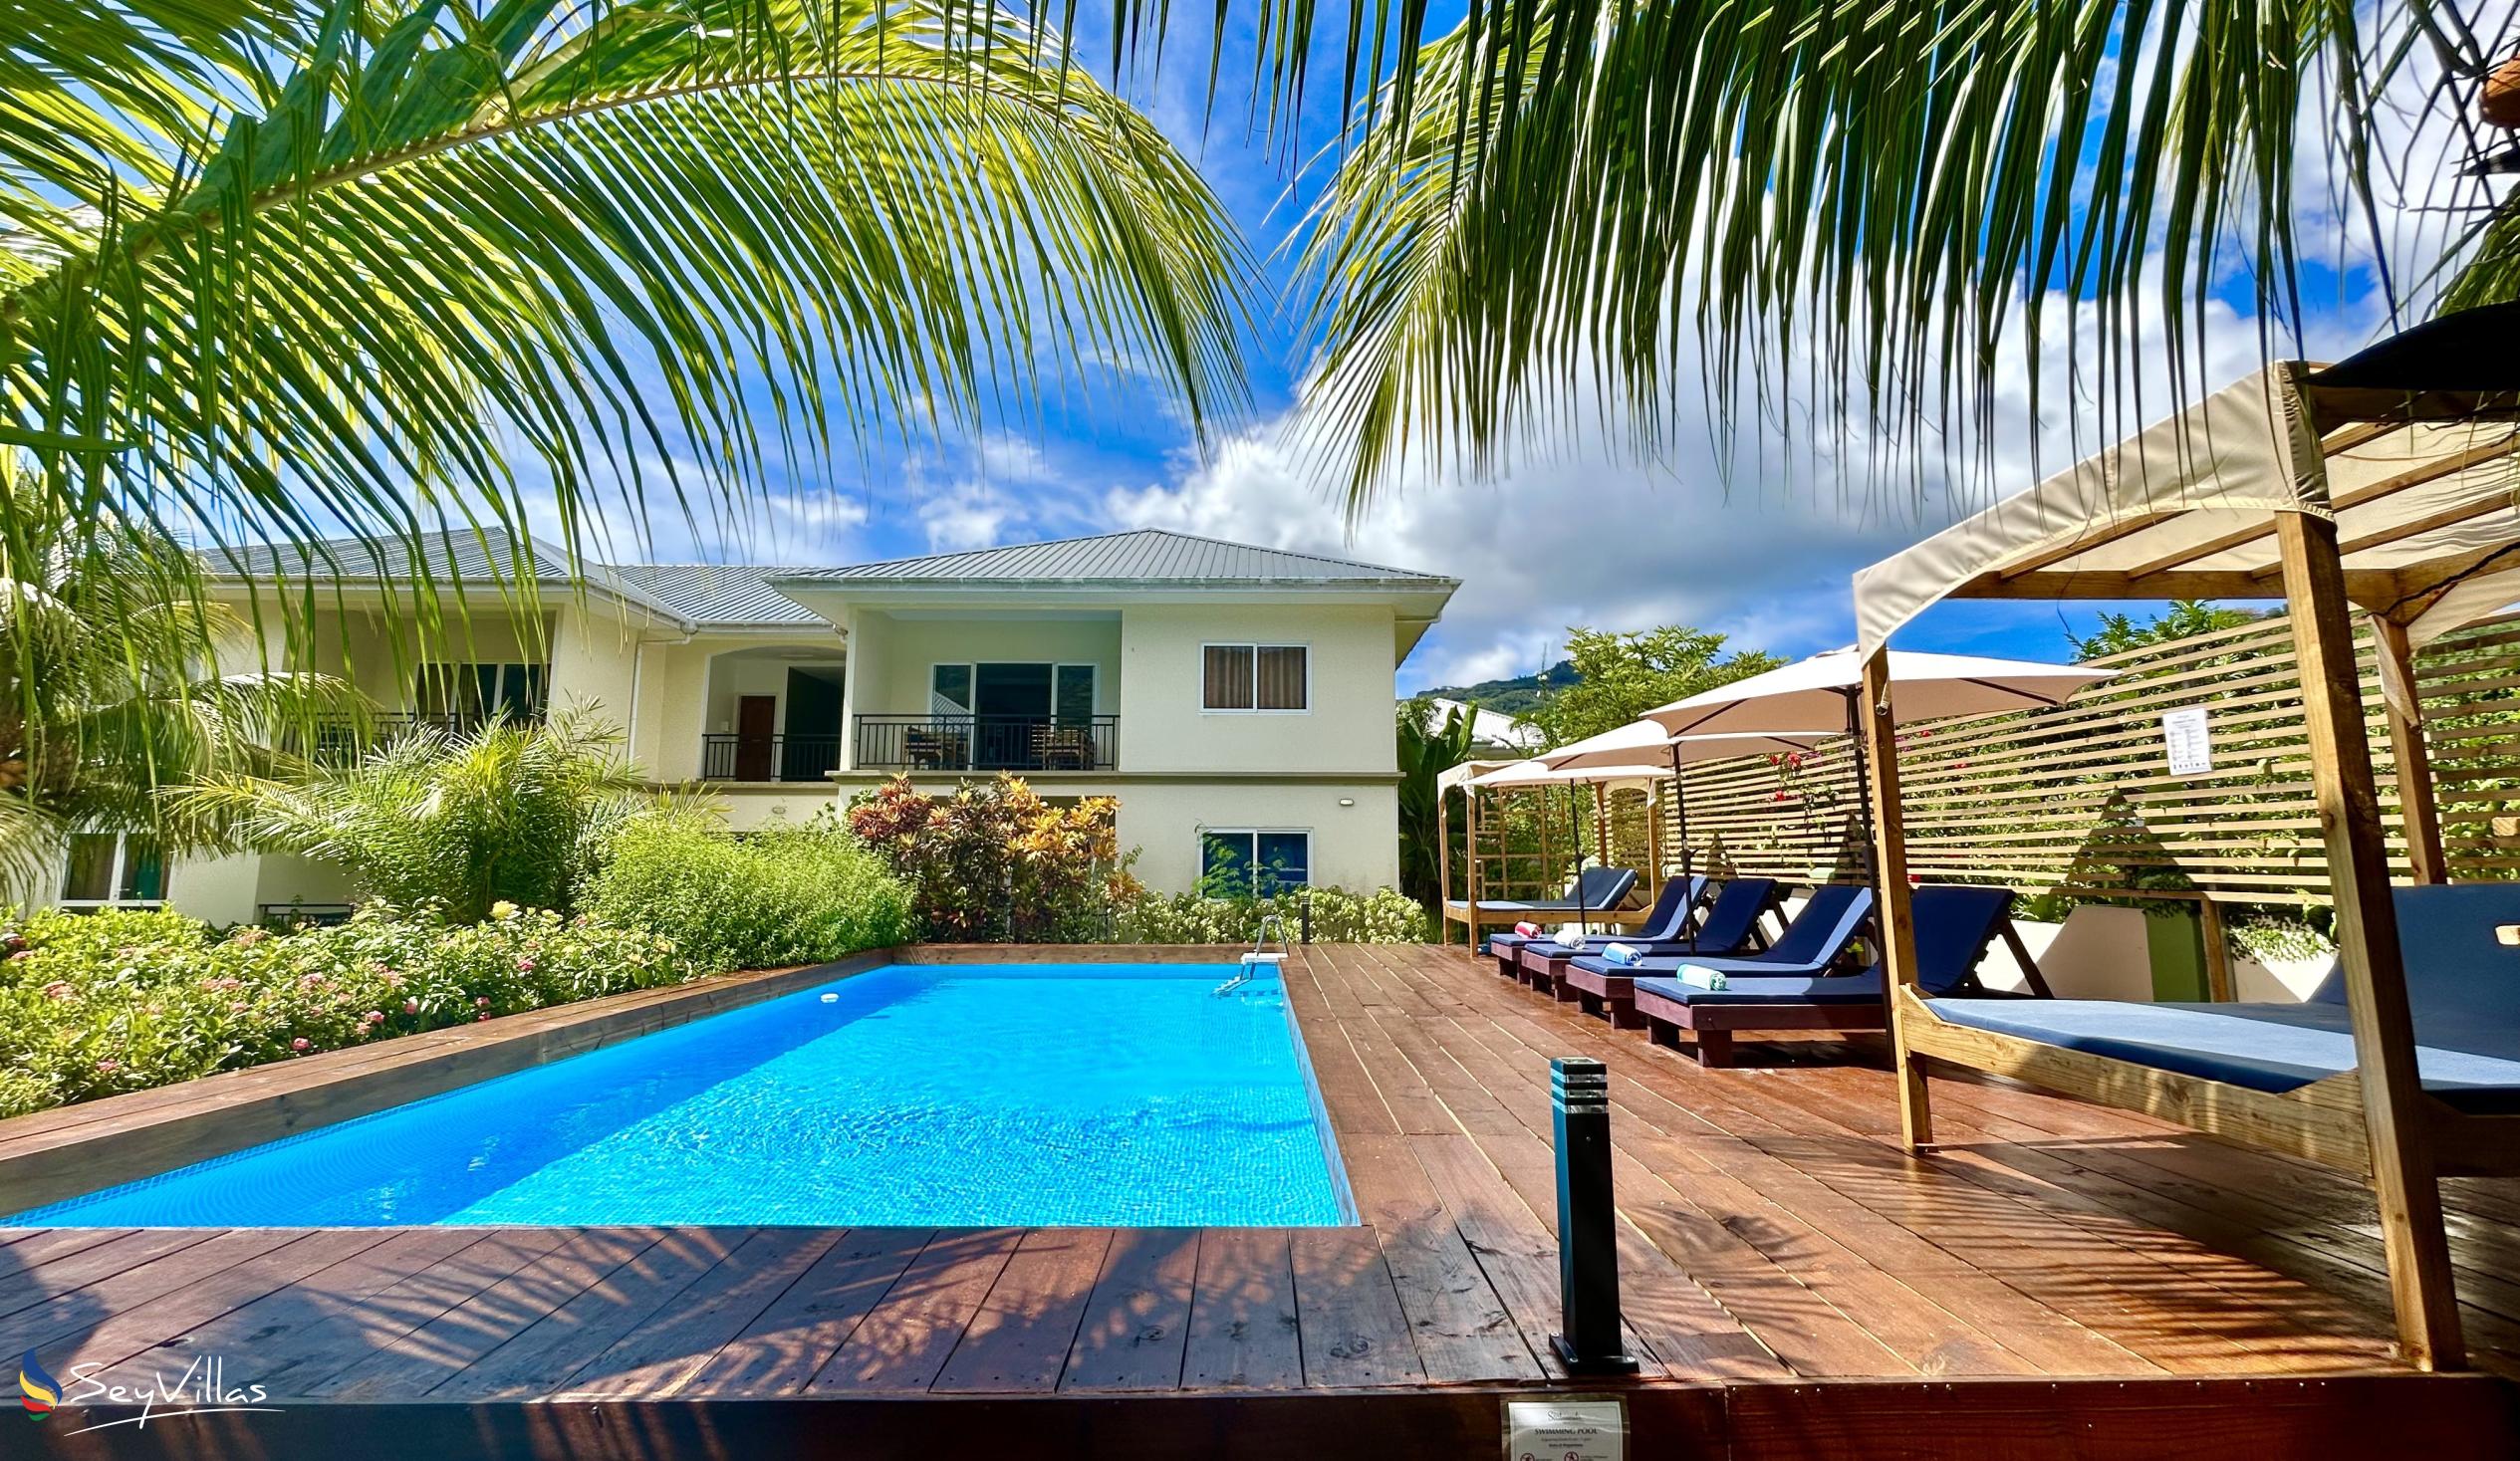 Photo 2: The Seaboards Apartments - Outdoor area - Mahé (Seychelles)